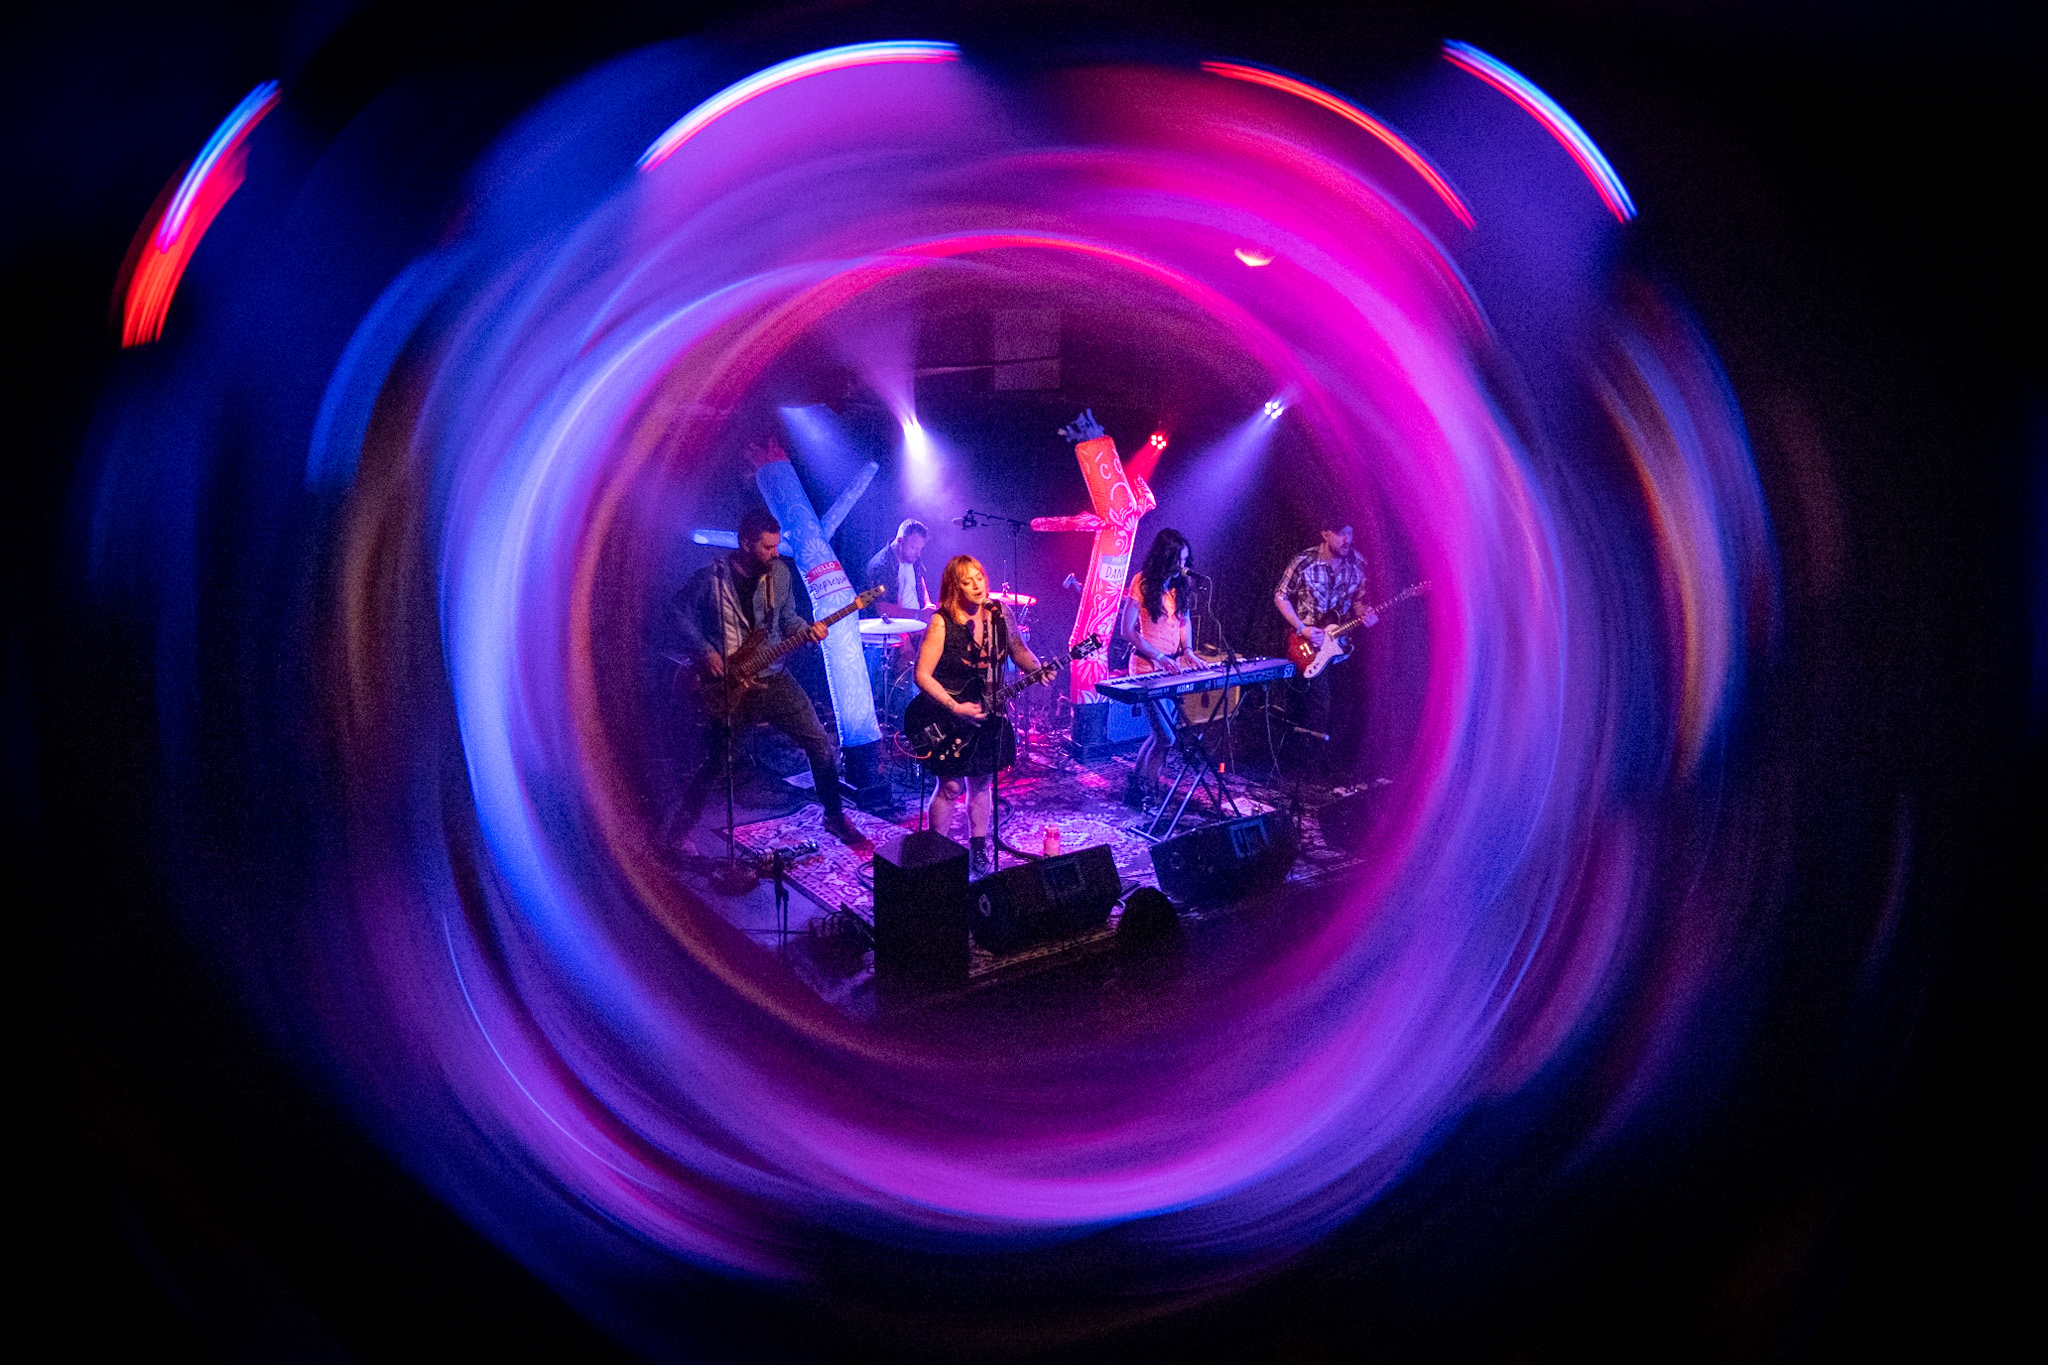 The Cancellations performing live at the East Room, surrounded by a swirl of colorful lights